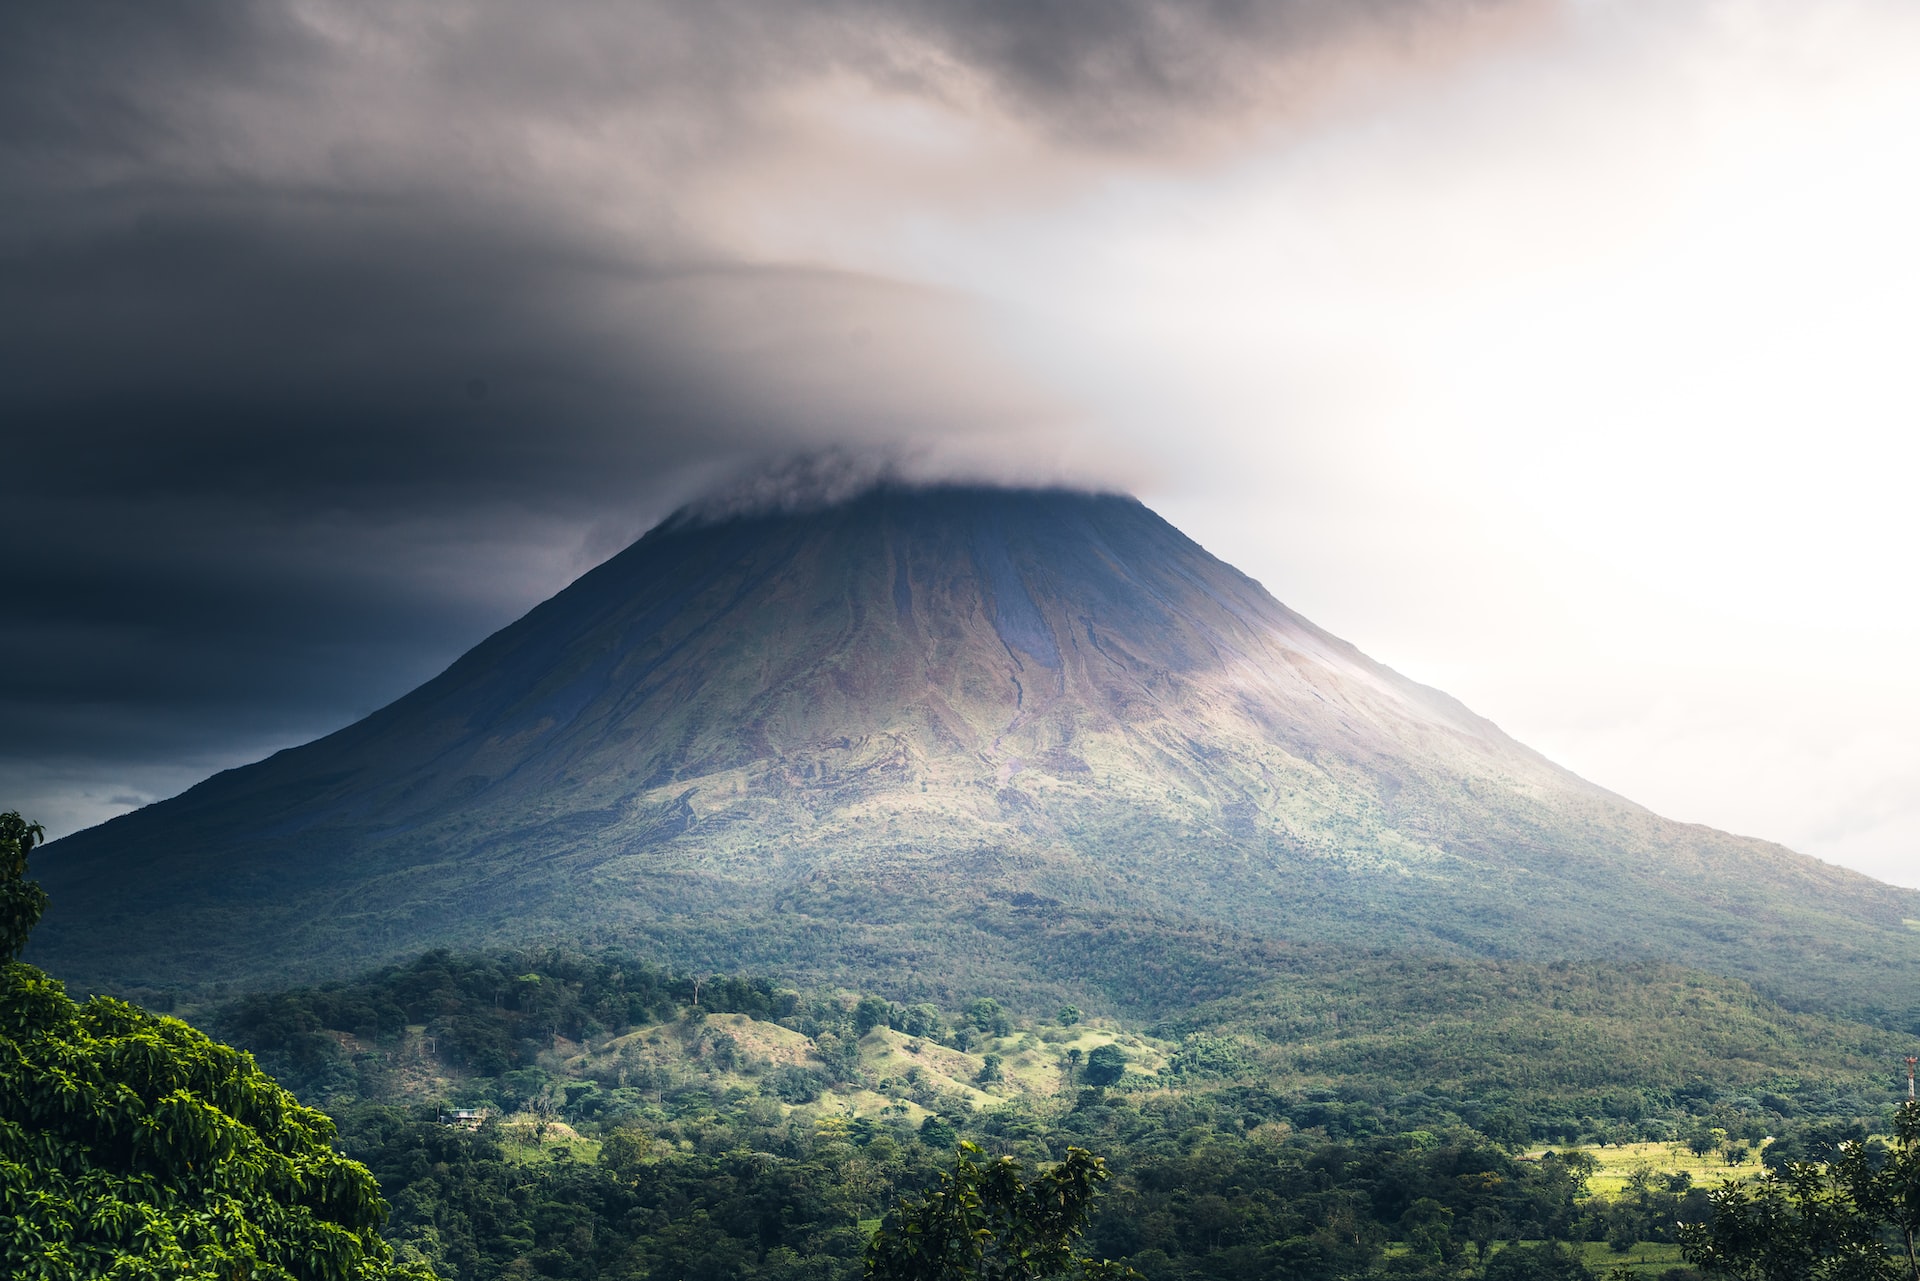 The peak of a large mountain in Costa Rica obscured by clouds.